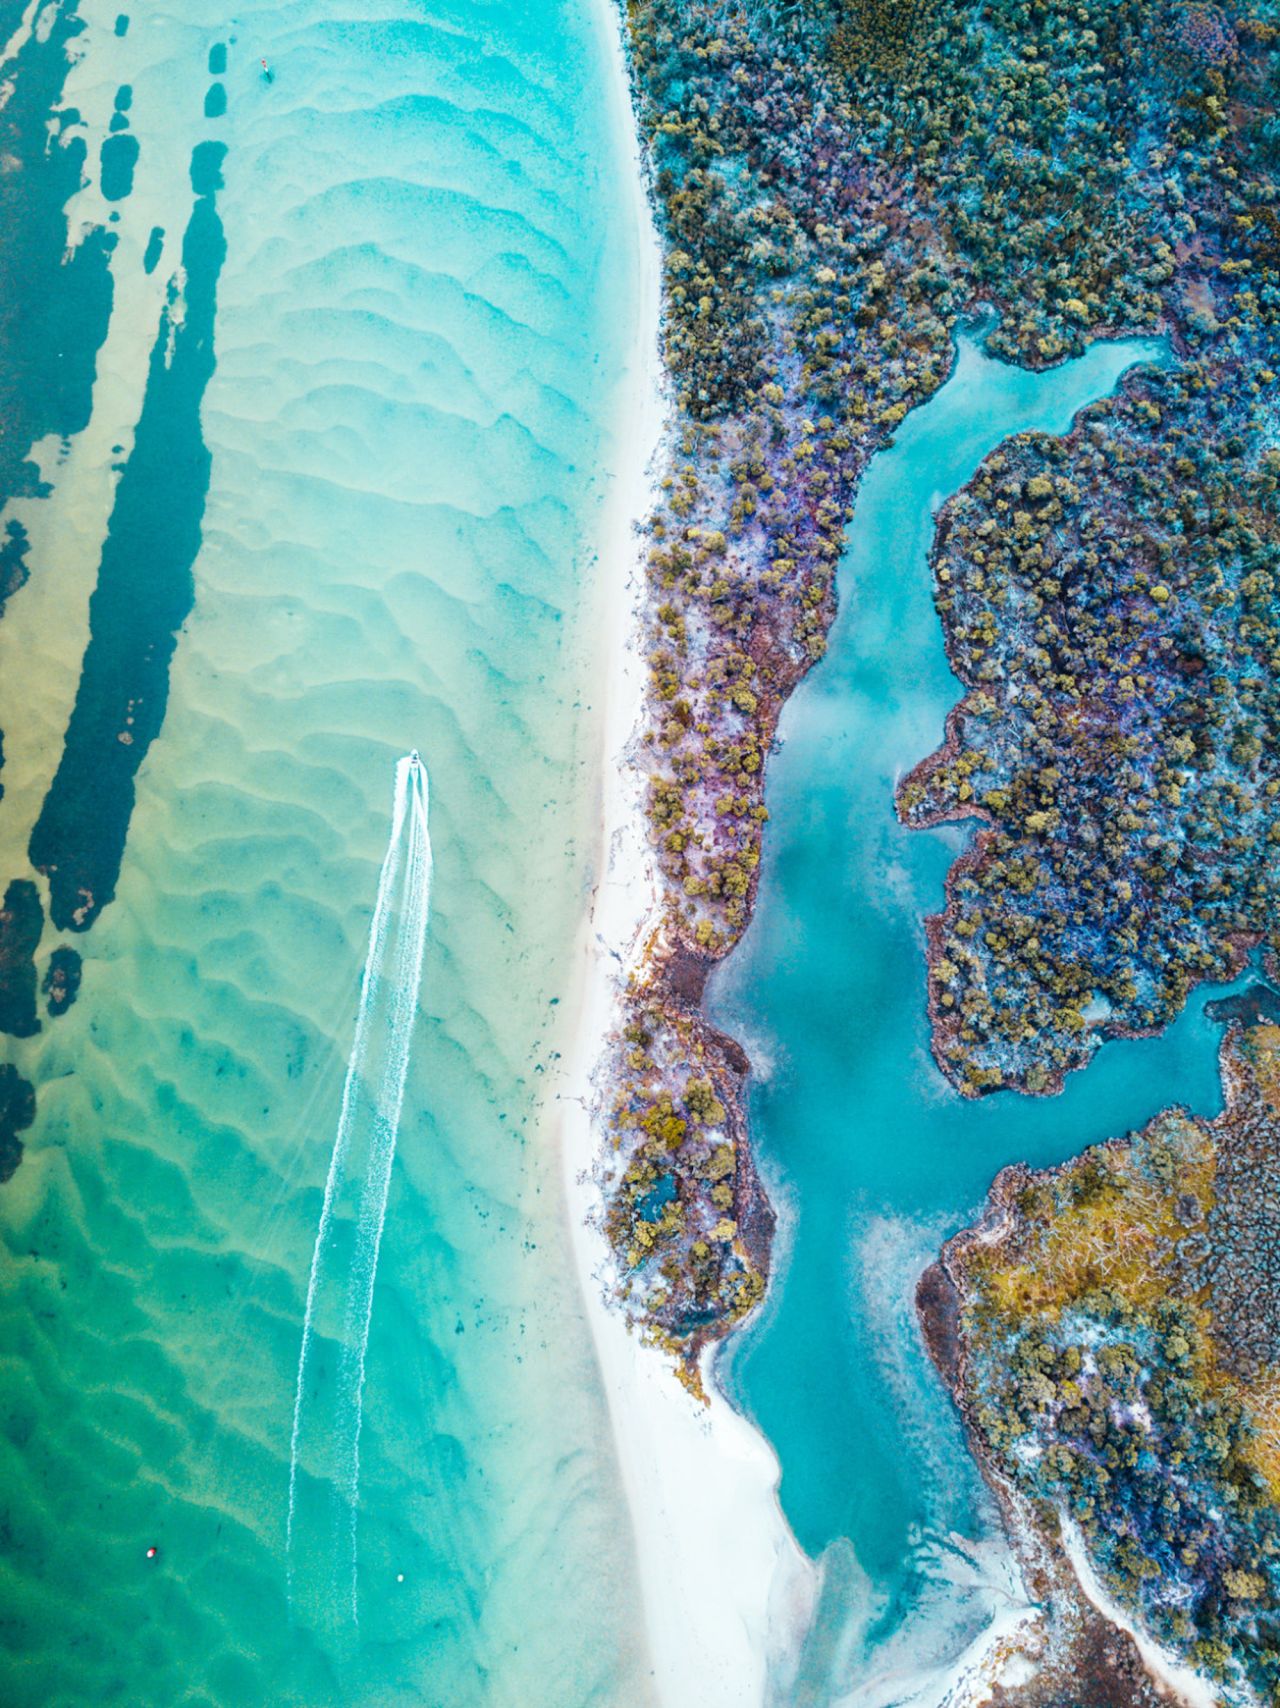 <strong>Rigby Island, Victoria: </strong>"The vivid turquoise and sculptural shapes are astounding; it seems almost abstract, then all the lines drive your view to the almost invisible boat leaving a broad wake," said judges of the third prize winner, by photographer <a href="https://www.skypixel.com/user/pyan" target="_blank" target="_blank">Peter Yan</a>.  